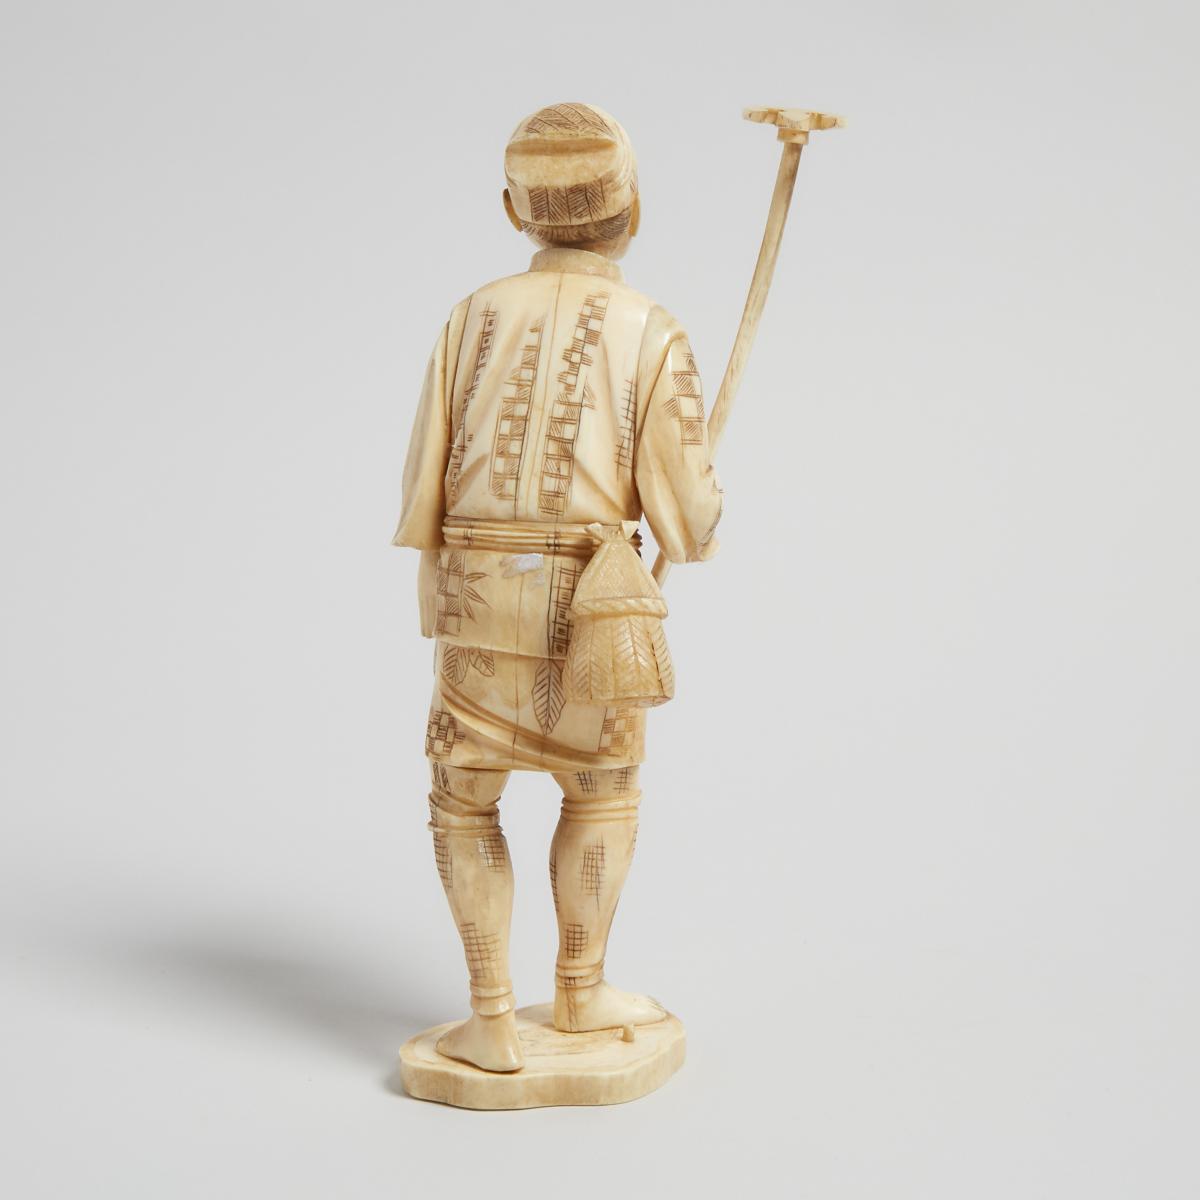 A Bone Carved Okimono of a Farmer, Early 20th Century, 二十世紀早期 骨雕漁夫立像, height 9 in — 22.9 cm - Image 2 of 3